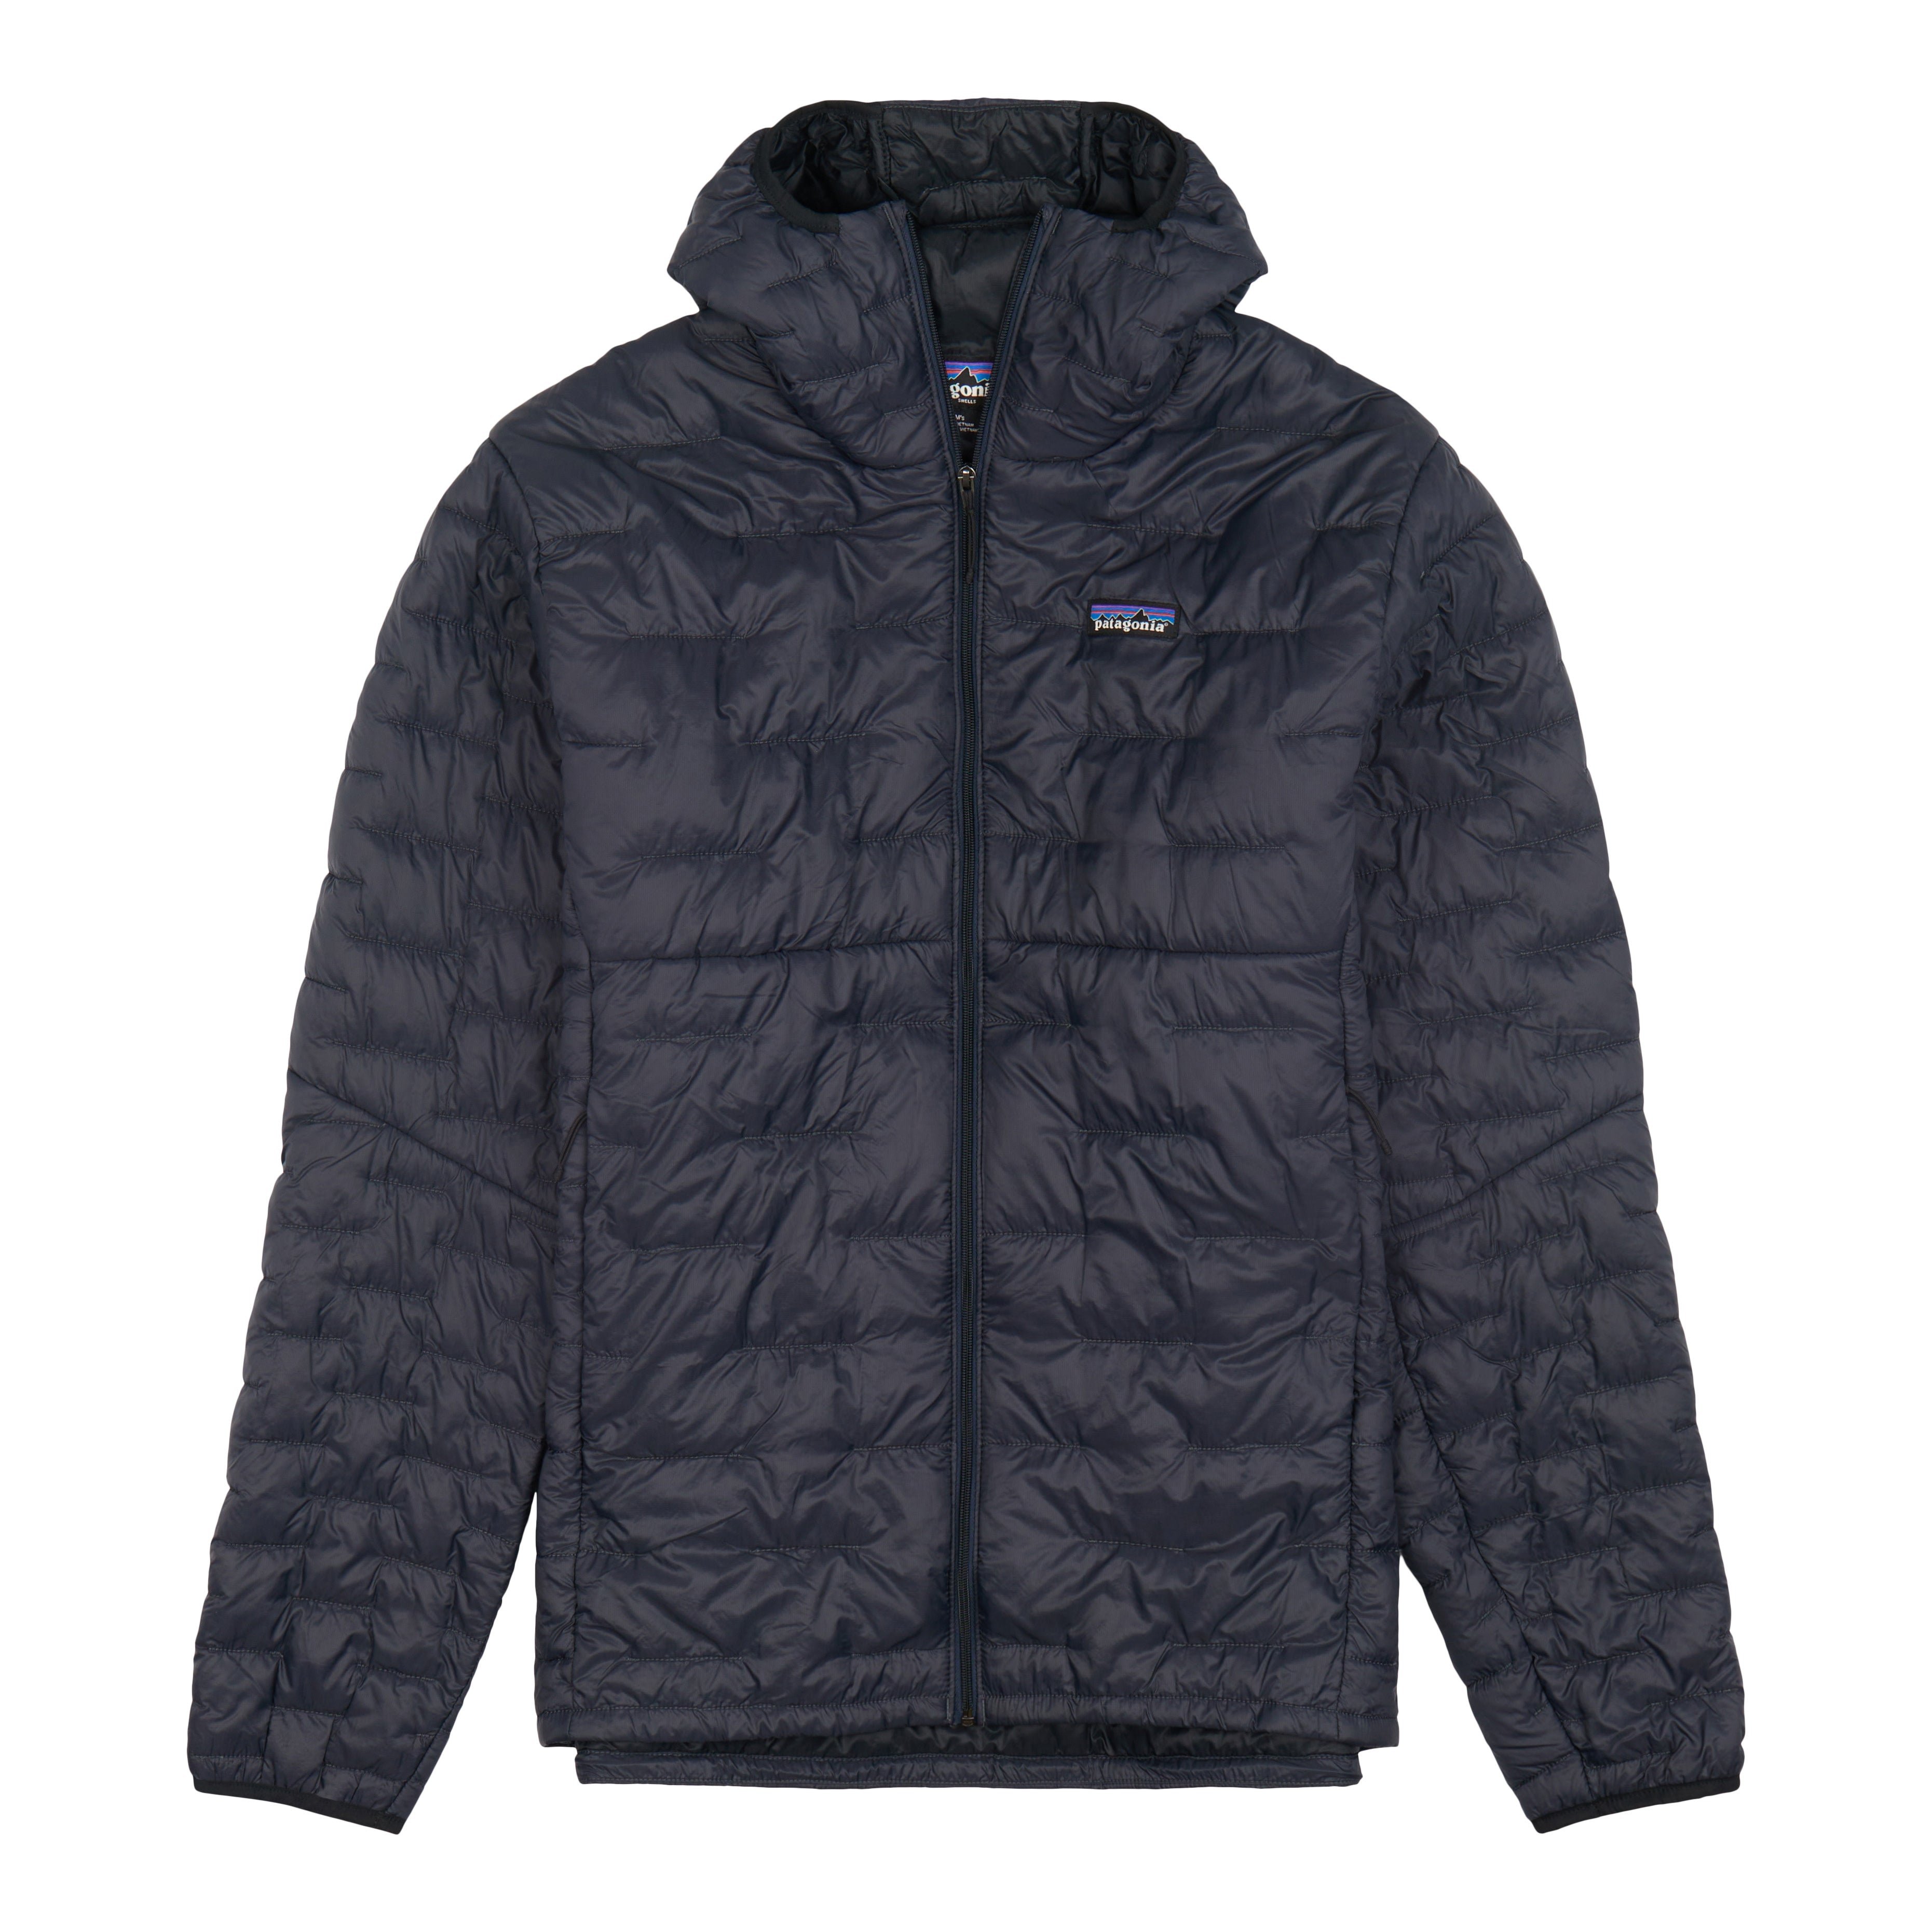 Patagonia Micro Puff Hoody - Synthetic jacket Men's, Free EU Delivery